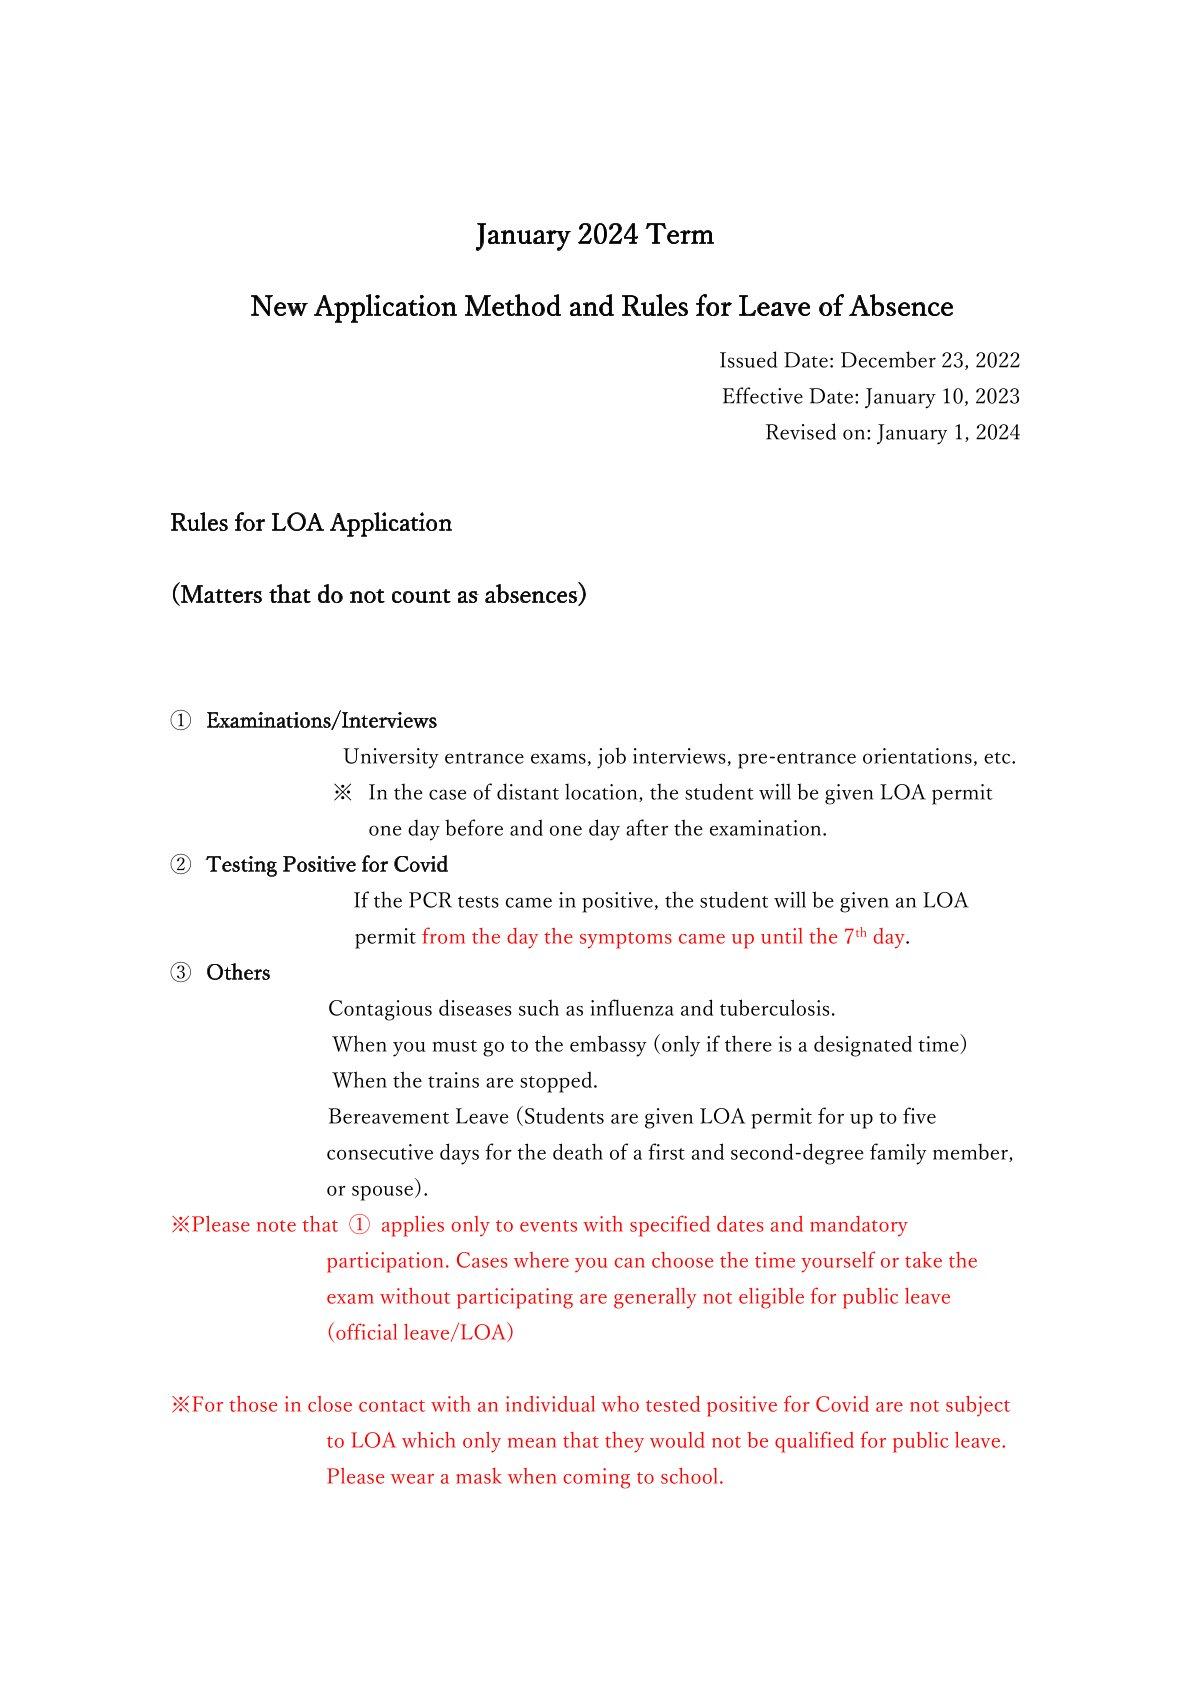 Application Method and Rules for Leave of Absence 